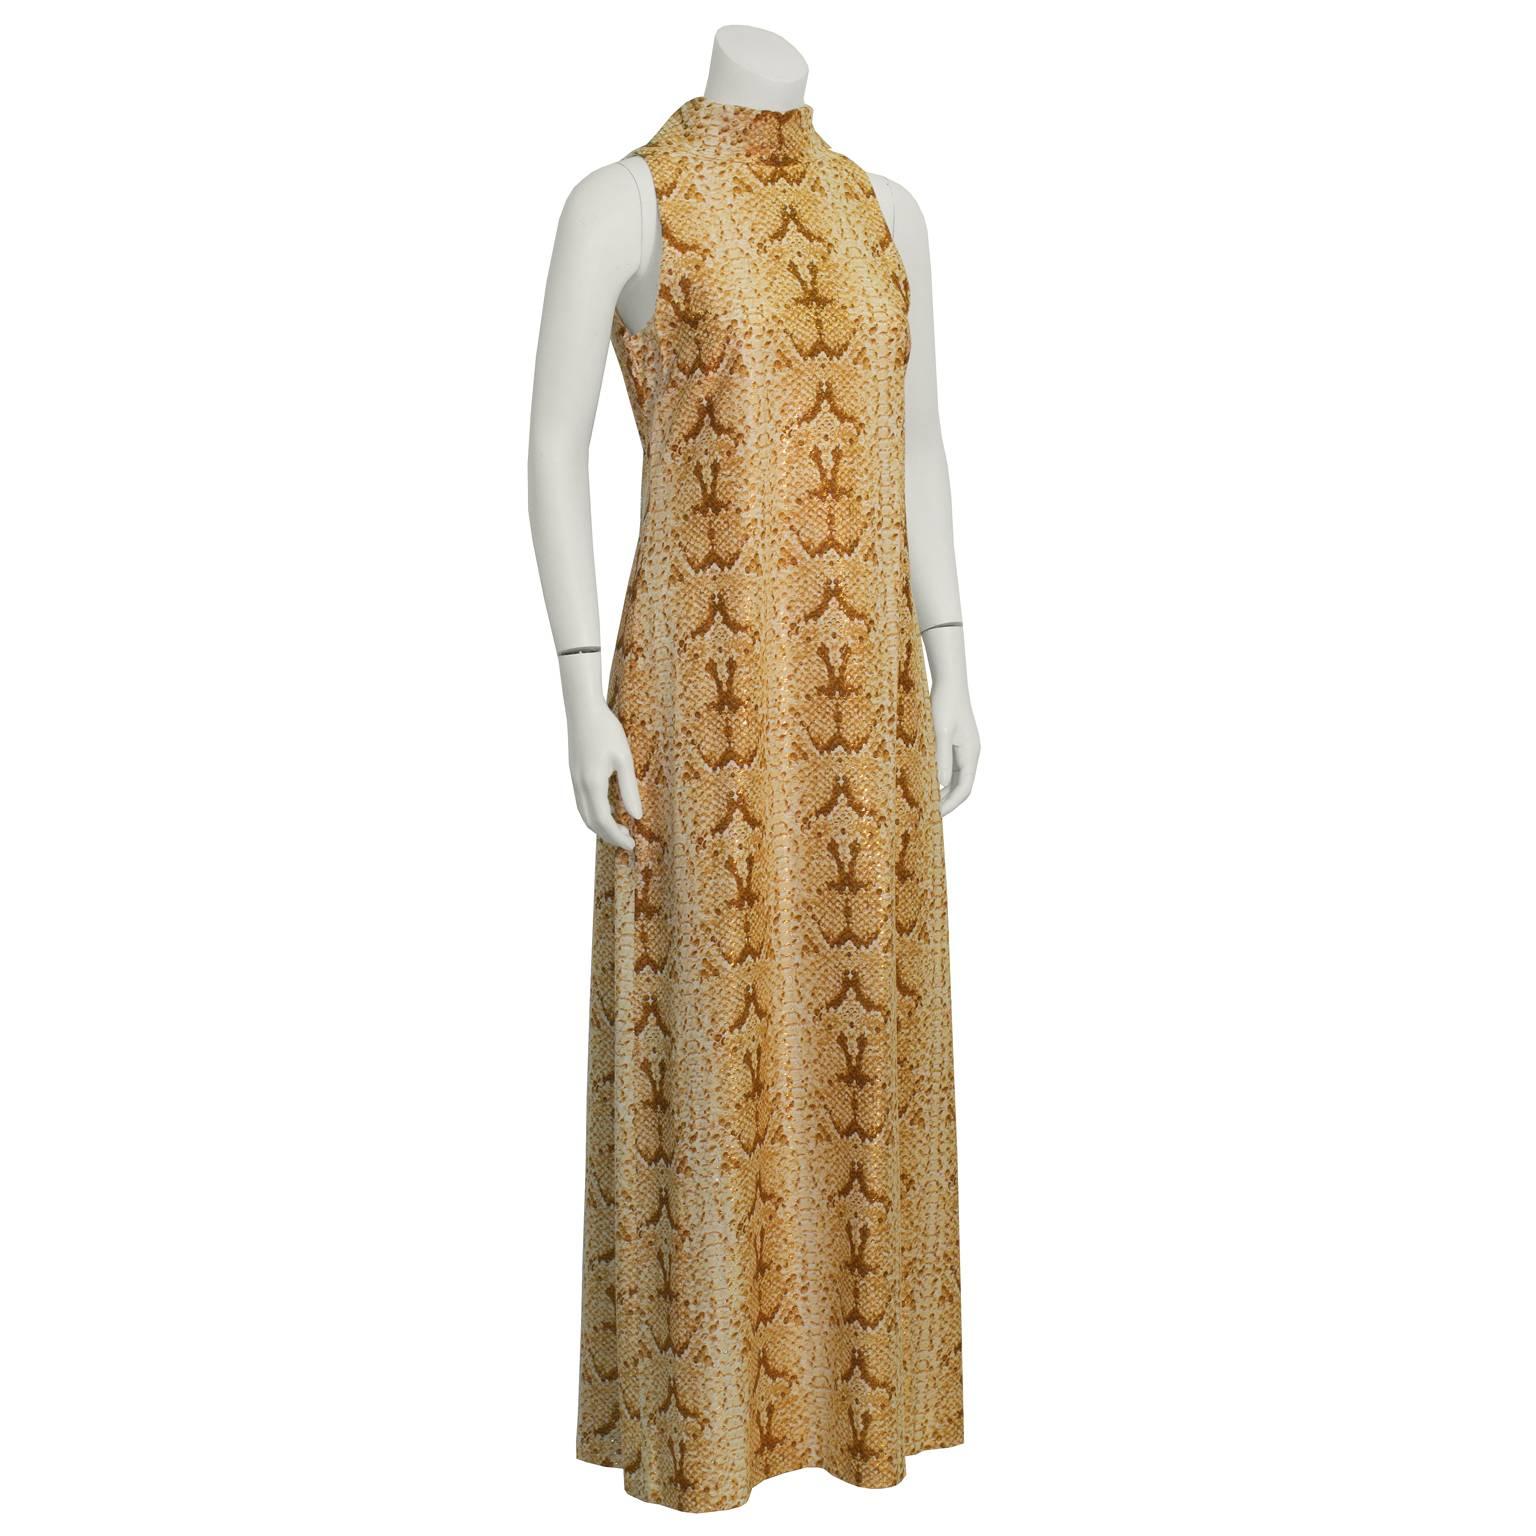 This anonymous 1970's mock turtleneck maxi dress is exotic and alluring with its copper metallic python print and gold lurex threading. Straight cut sleeveless maxi, with a folded neck and back zip closure. Excellent vintage condition. Just add sexy